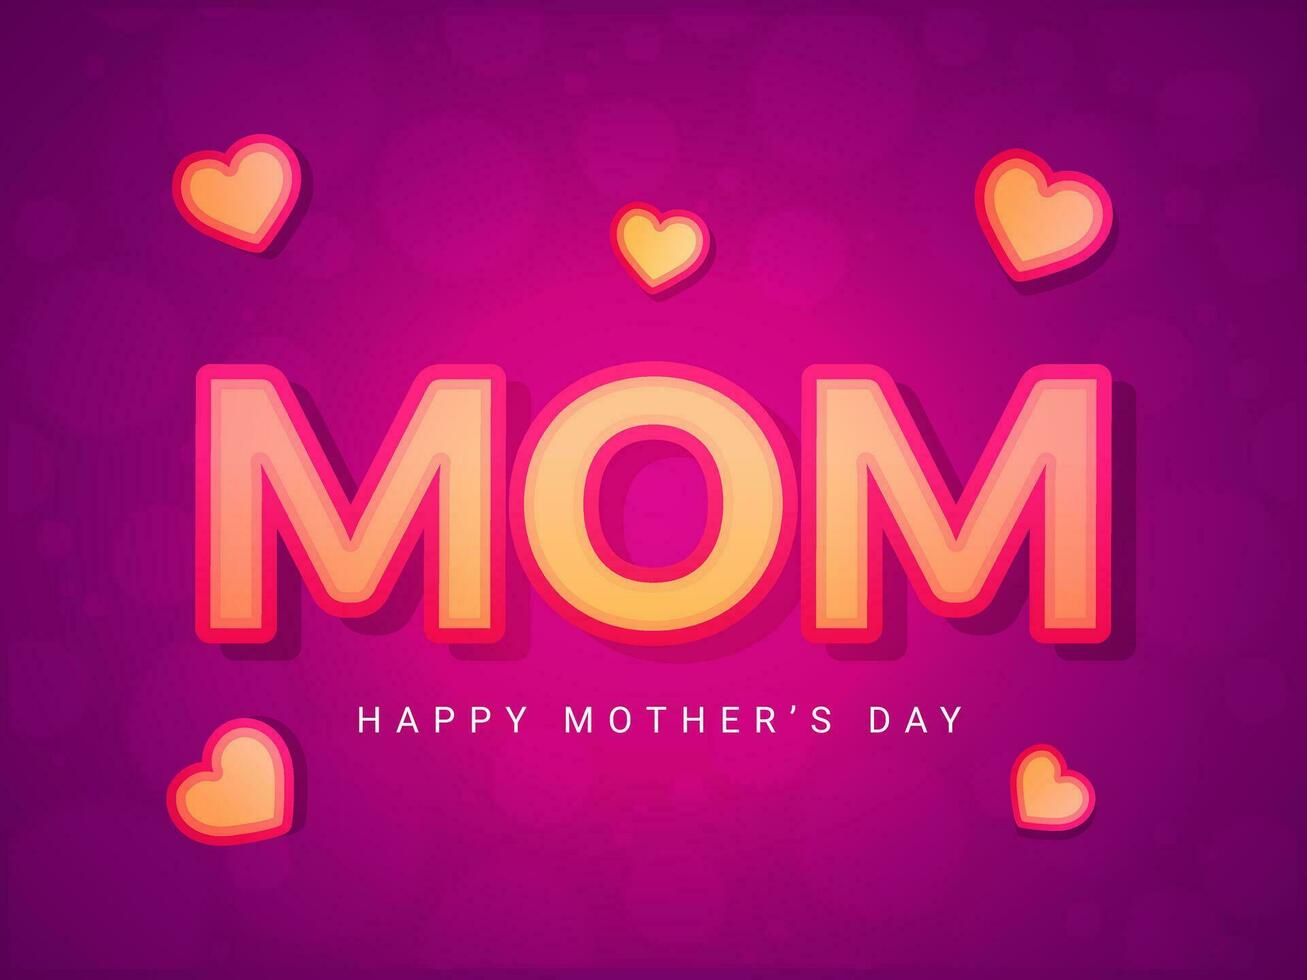 Banner or poster design, glossy lights text MOM for Happy Mother's Day. vector